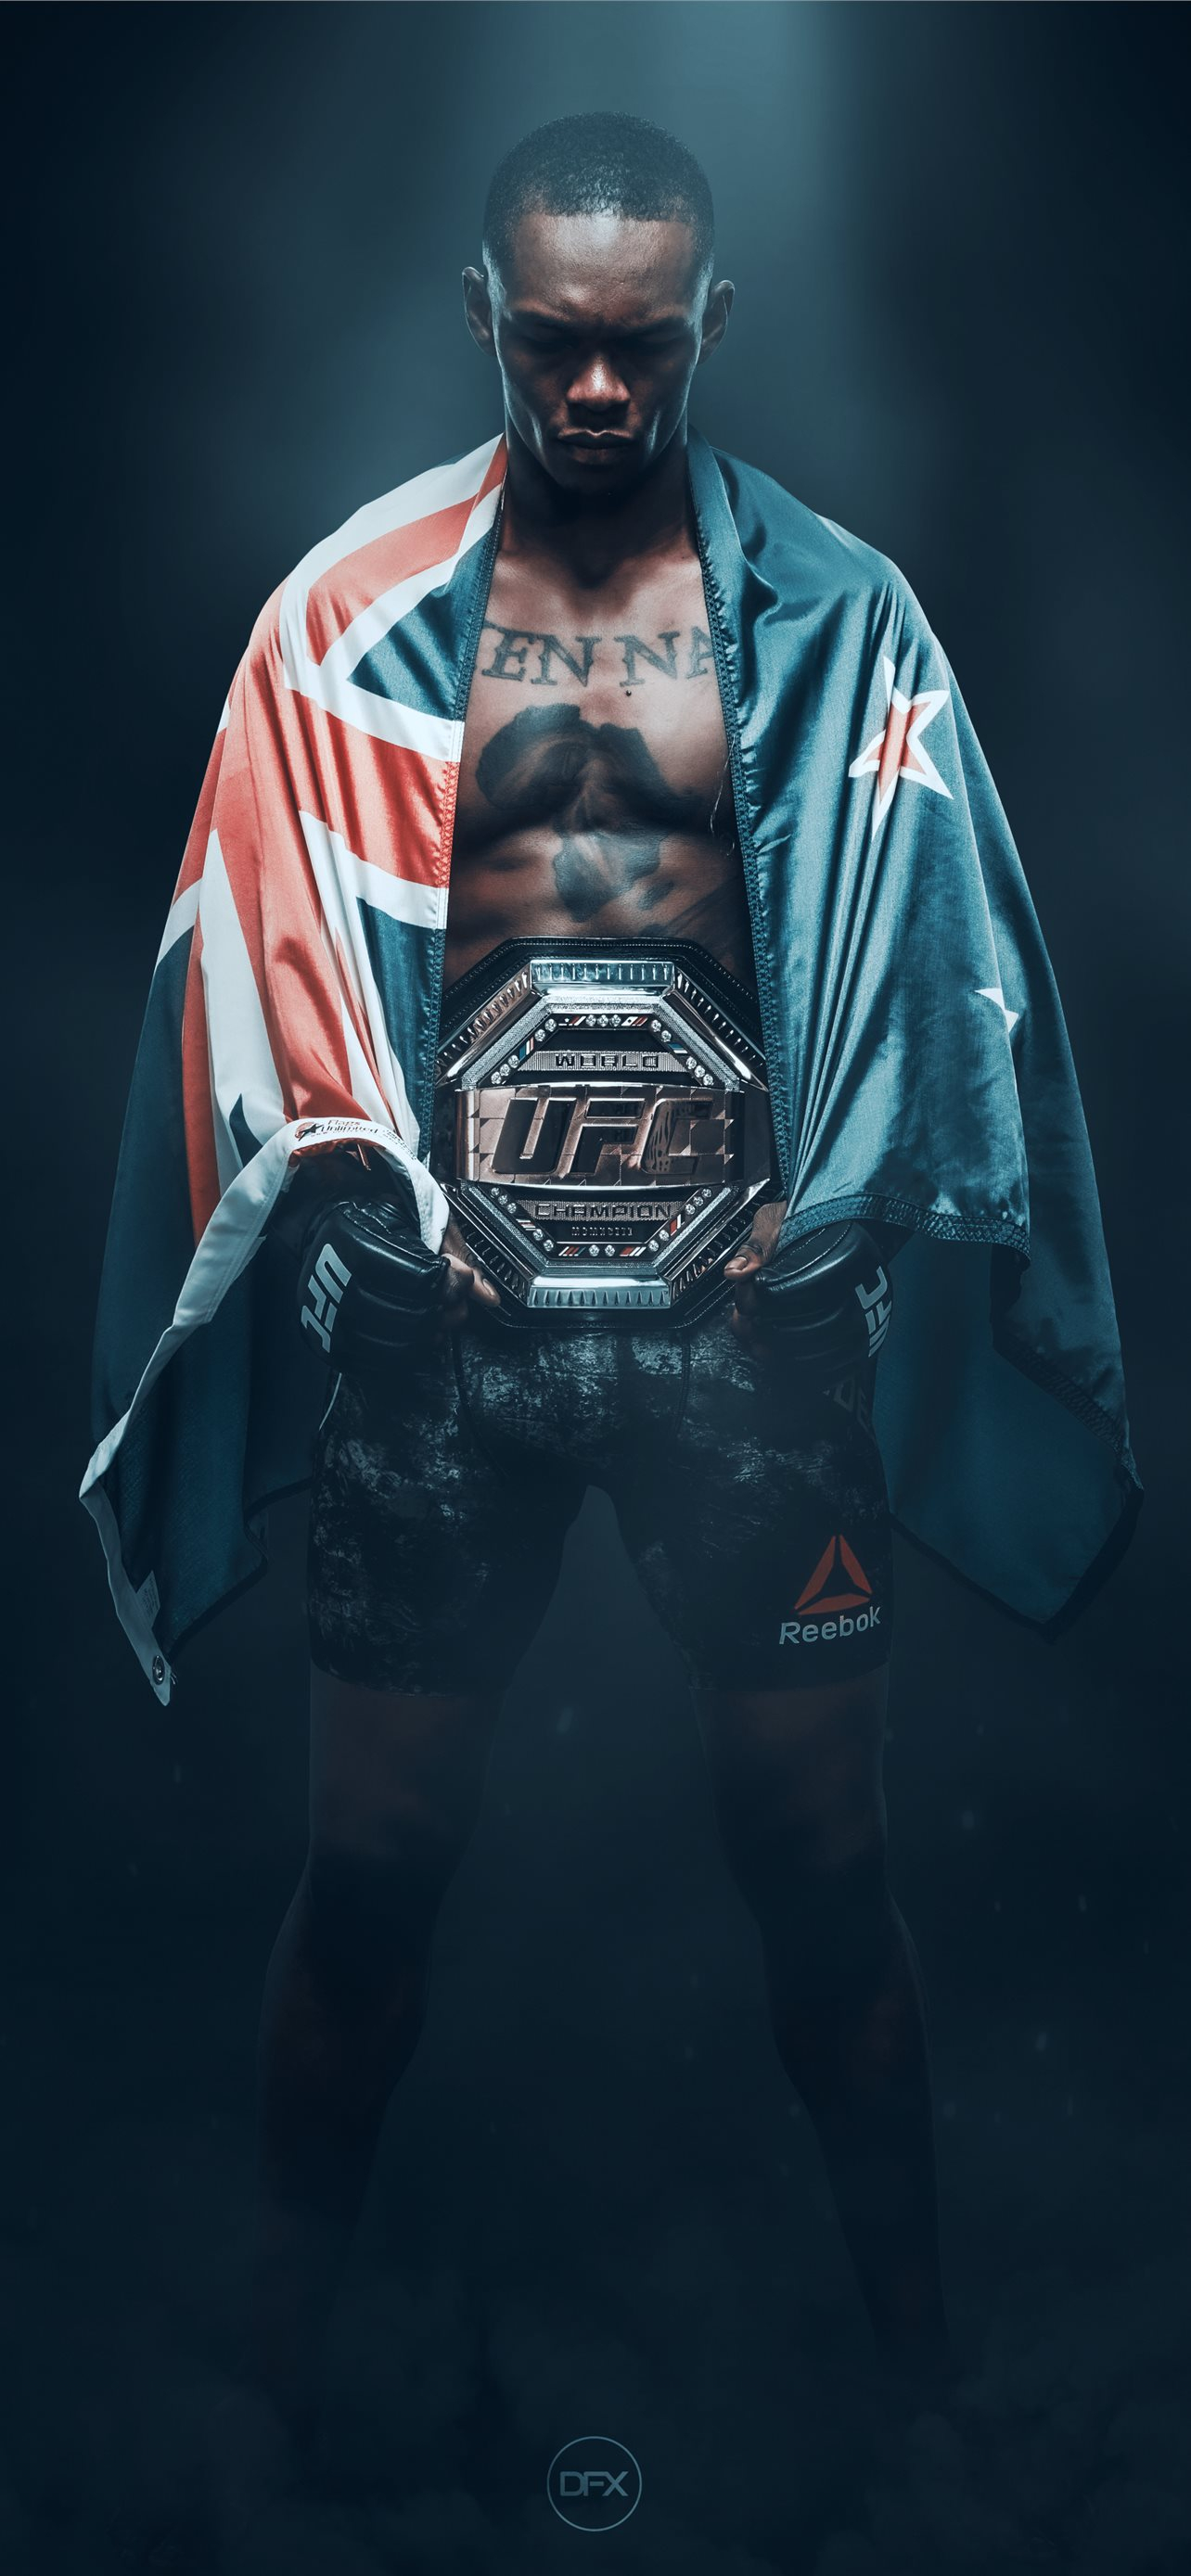 1284x2778 I made this edit of Israel Adesanya ufc iPhone Wallpapers Free Download